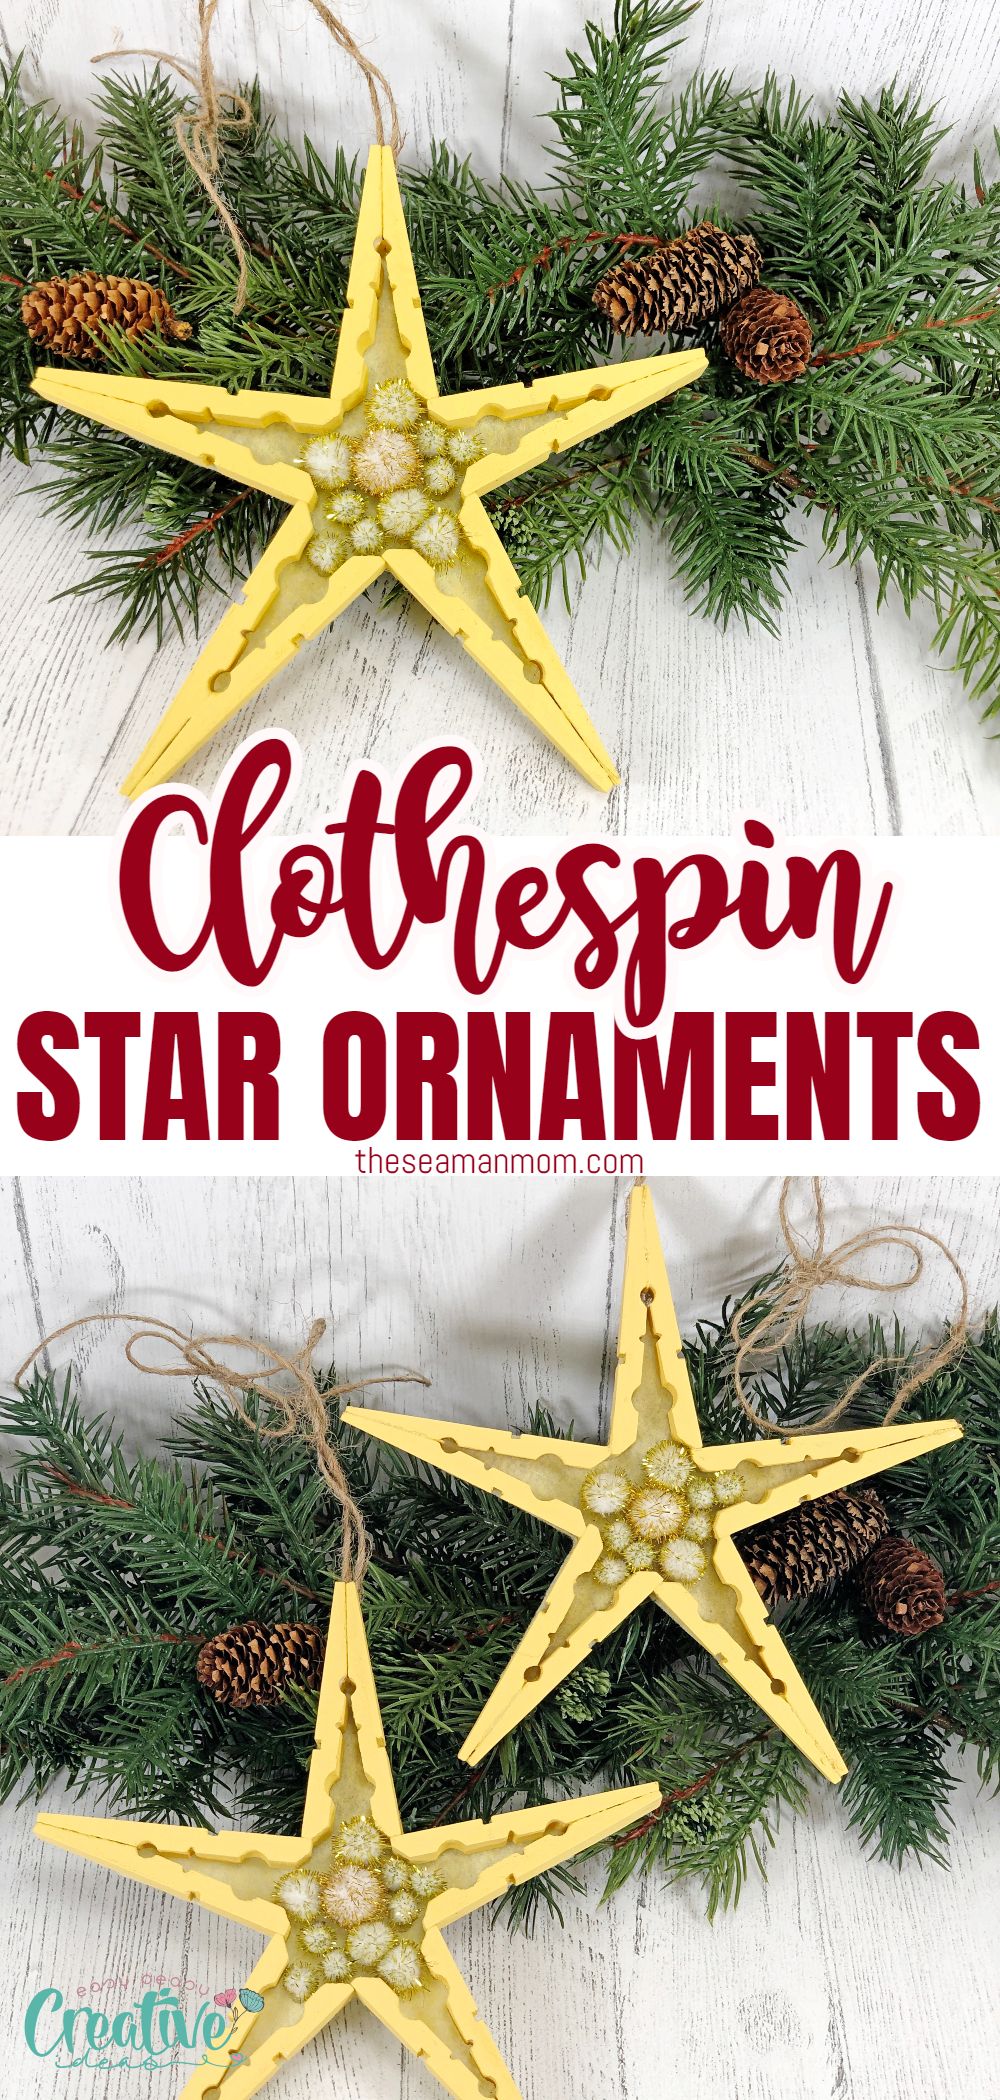 Looking for creative Christmas decorations that are both festive and functional? Look no further than these Christmas star ornaments made with clothespins!  via @petroneagu